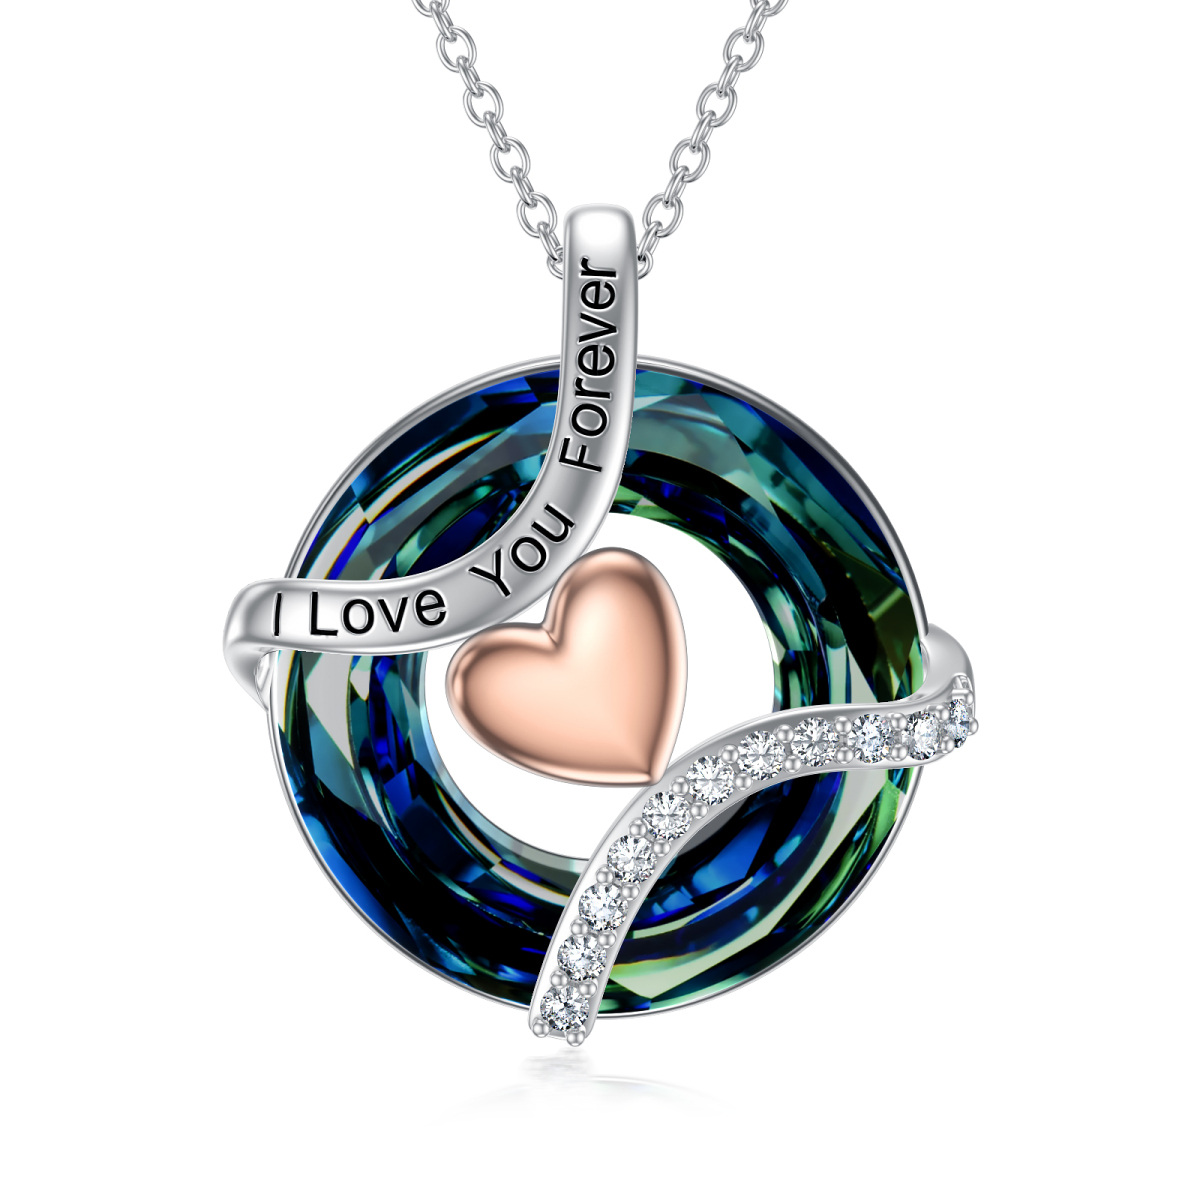 14K White Gold Circular Shaped Heart Crystal Pendant Necklace with Engraved Word-1